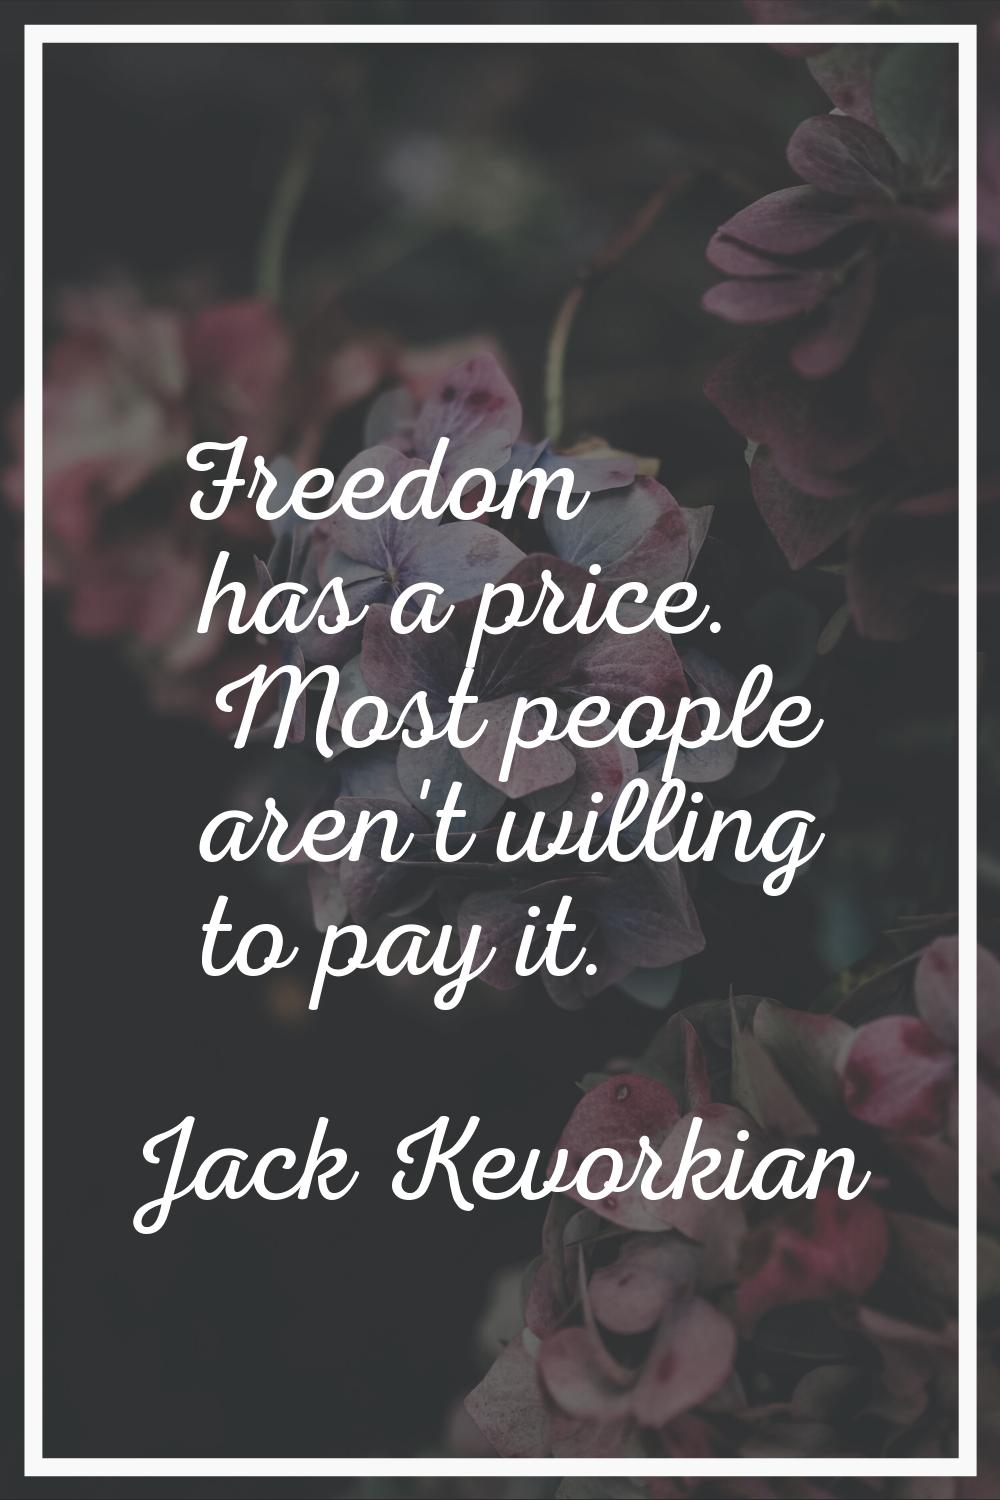 Freedom has a price. Most people aren't willing to pay it.